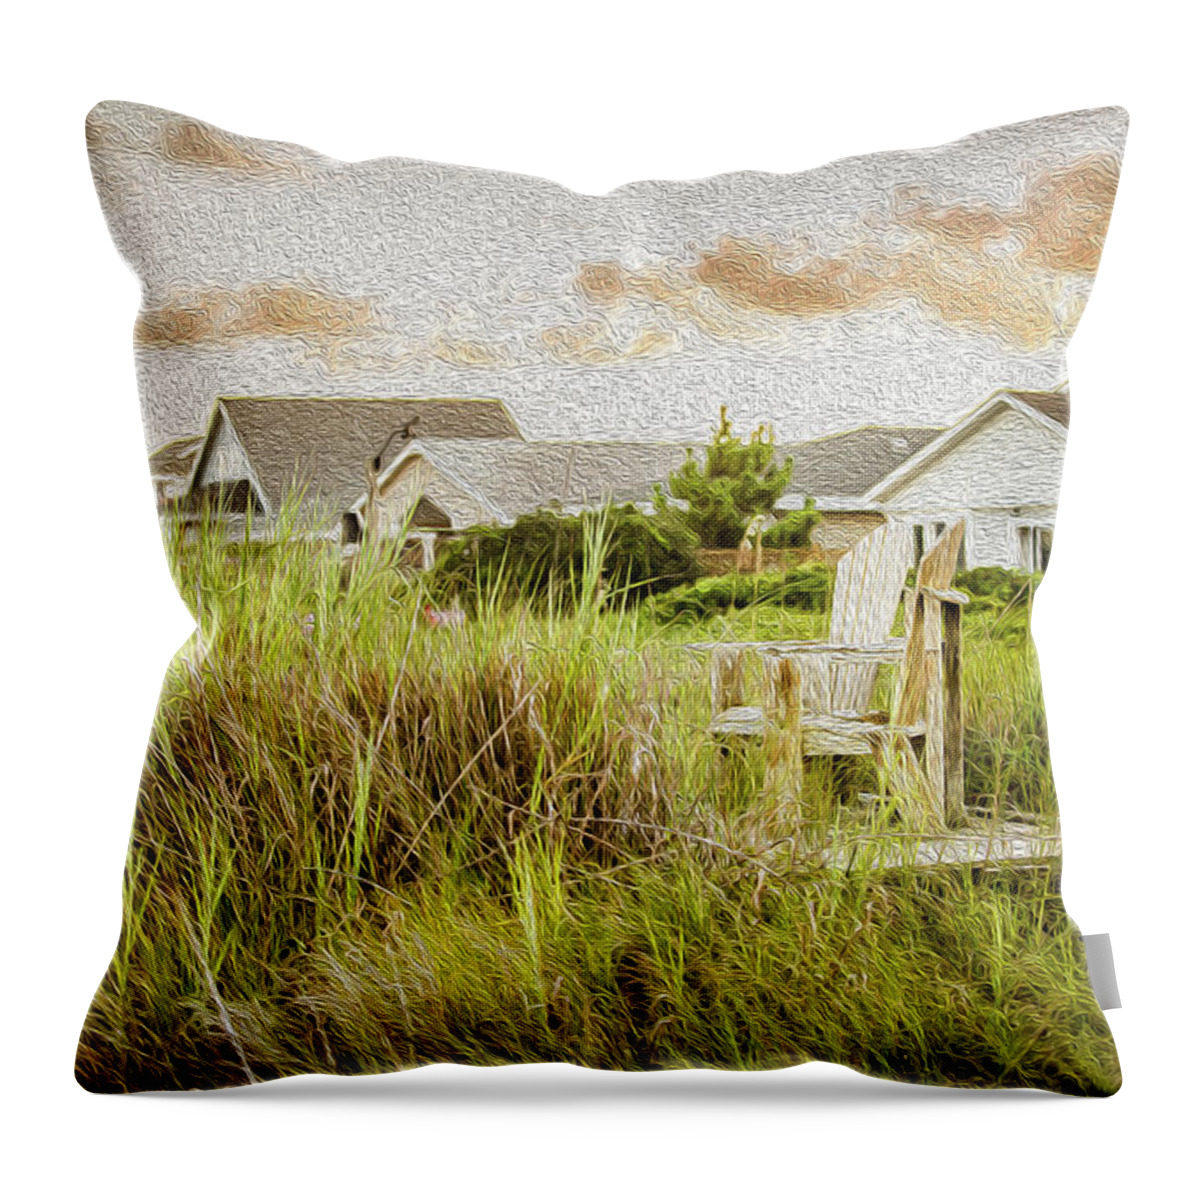 Beach Chairs Throw Pillow featuring the photograph Their Little Spot By The Sea by Cynthia Wolfe